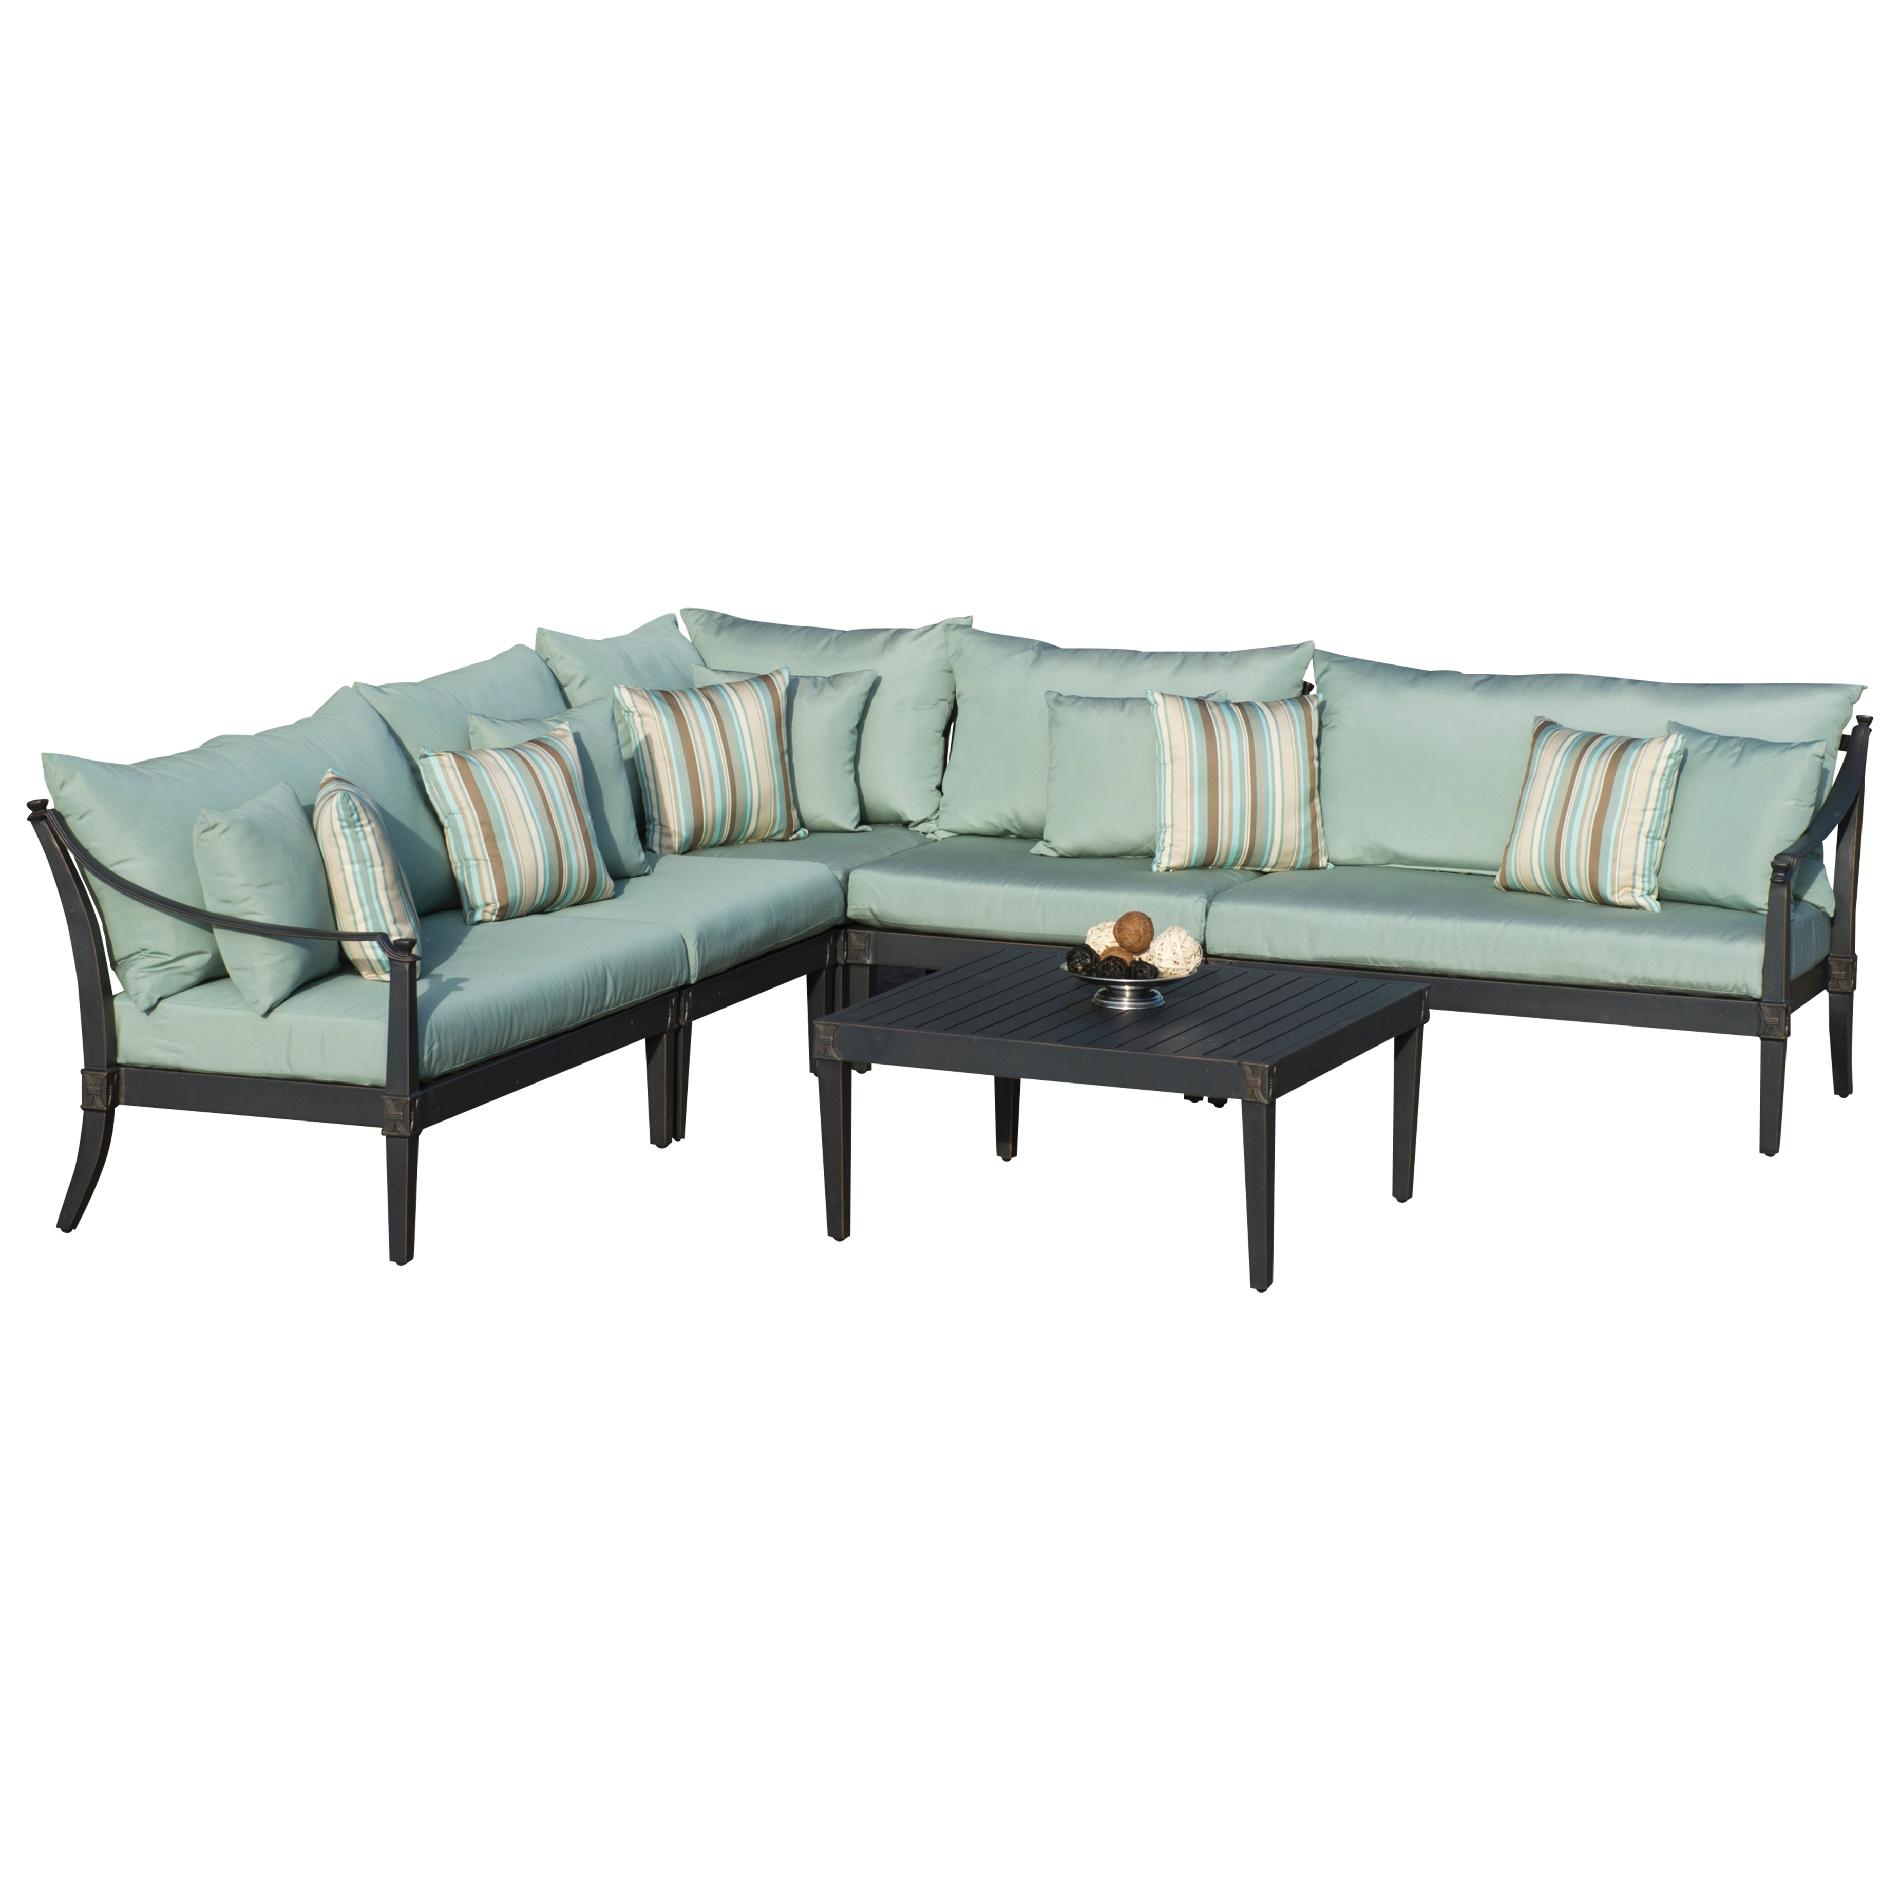 RST Brands Astoria 6pc Sectional & Table in assorted colors